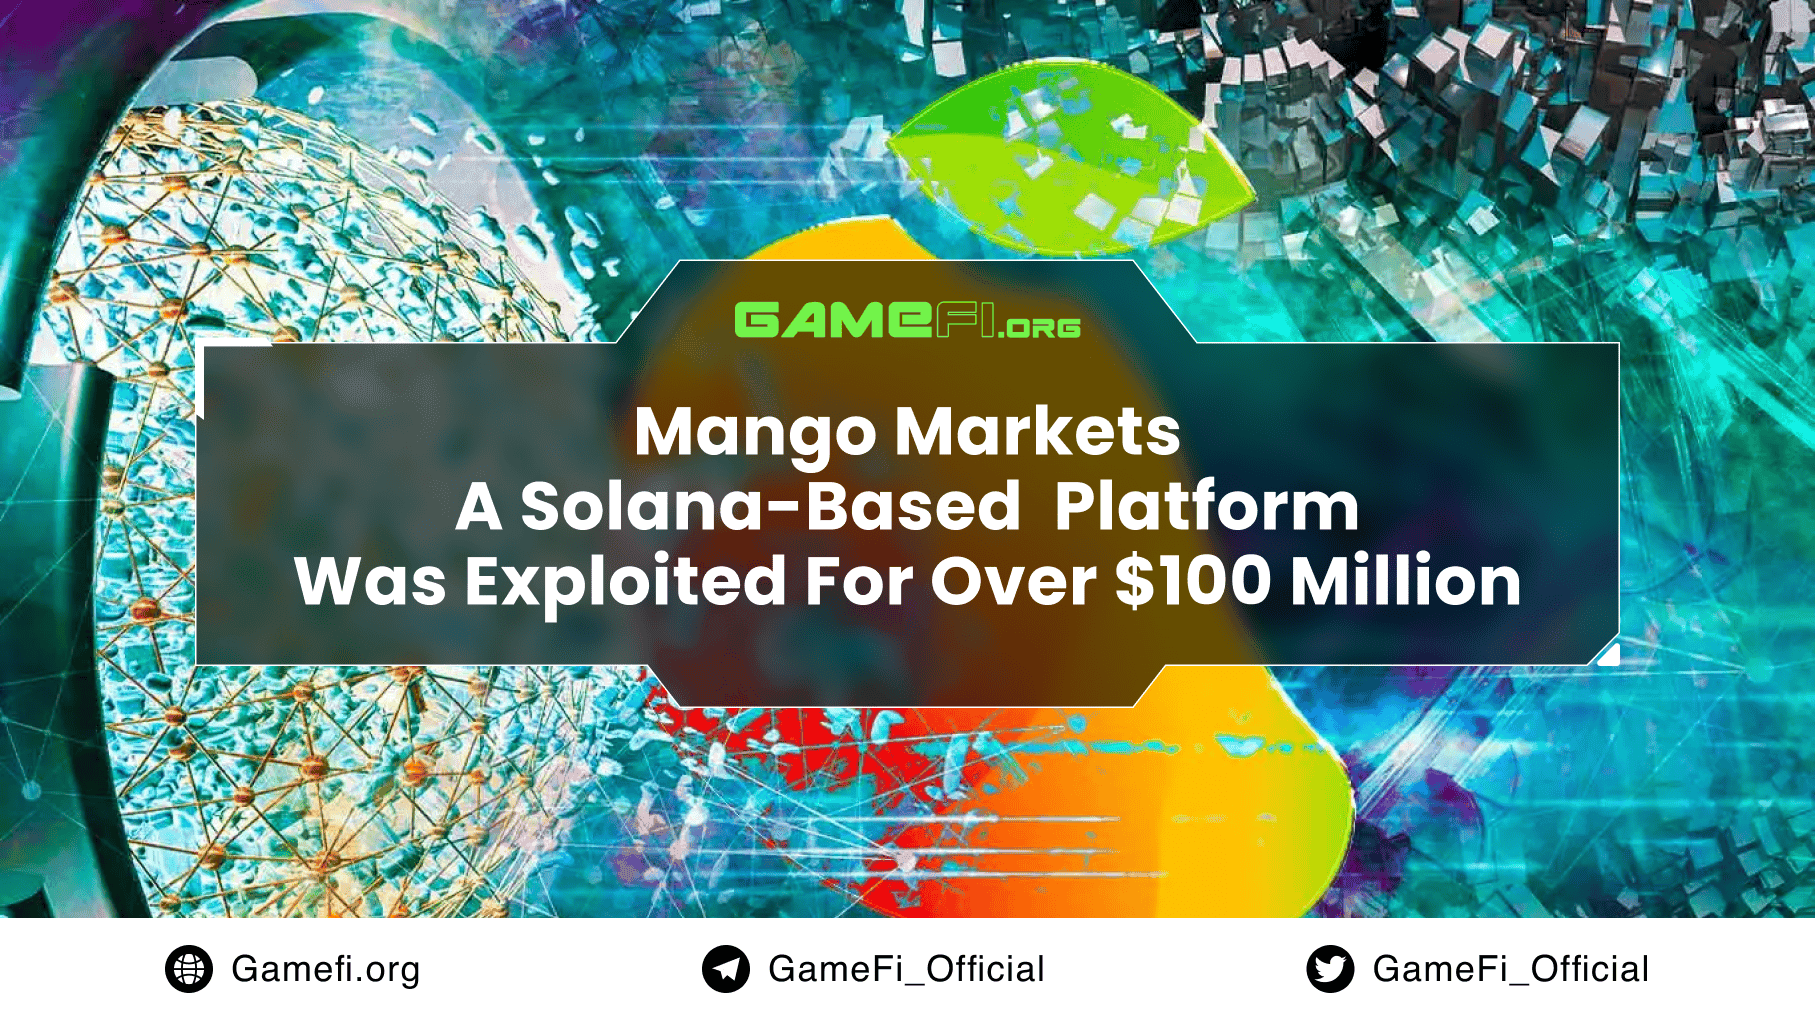 (Updated Oct 16) Mango Markets, a Solana-Based Decentralized Finance Platform, was Exploited for over $100 million